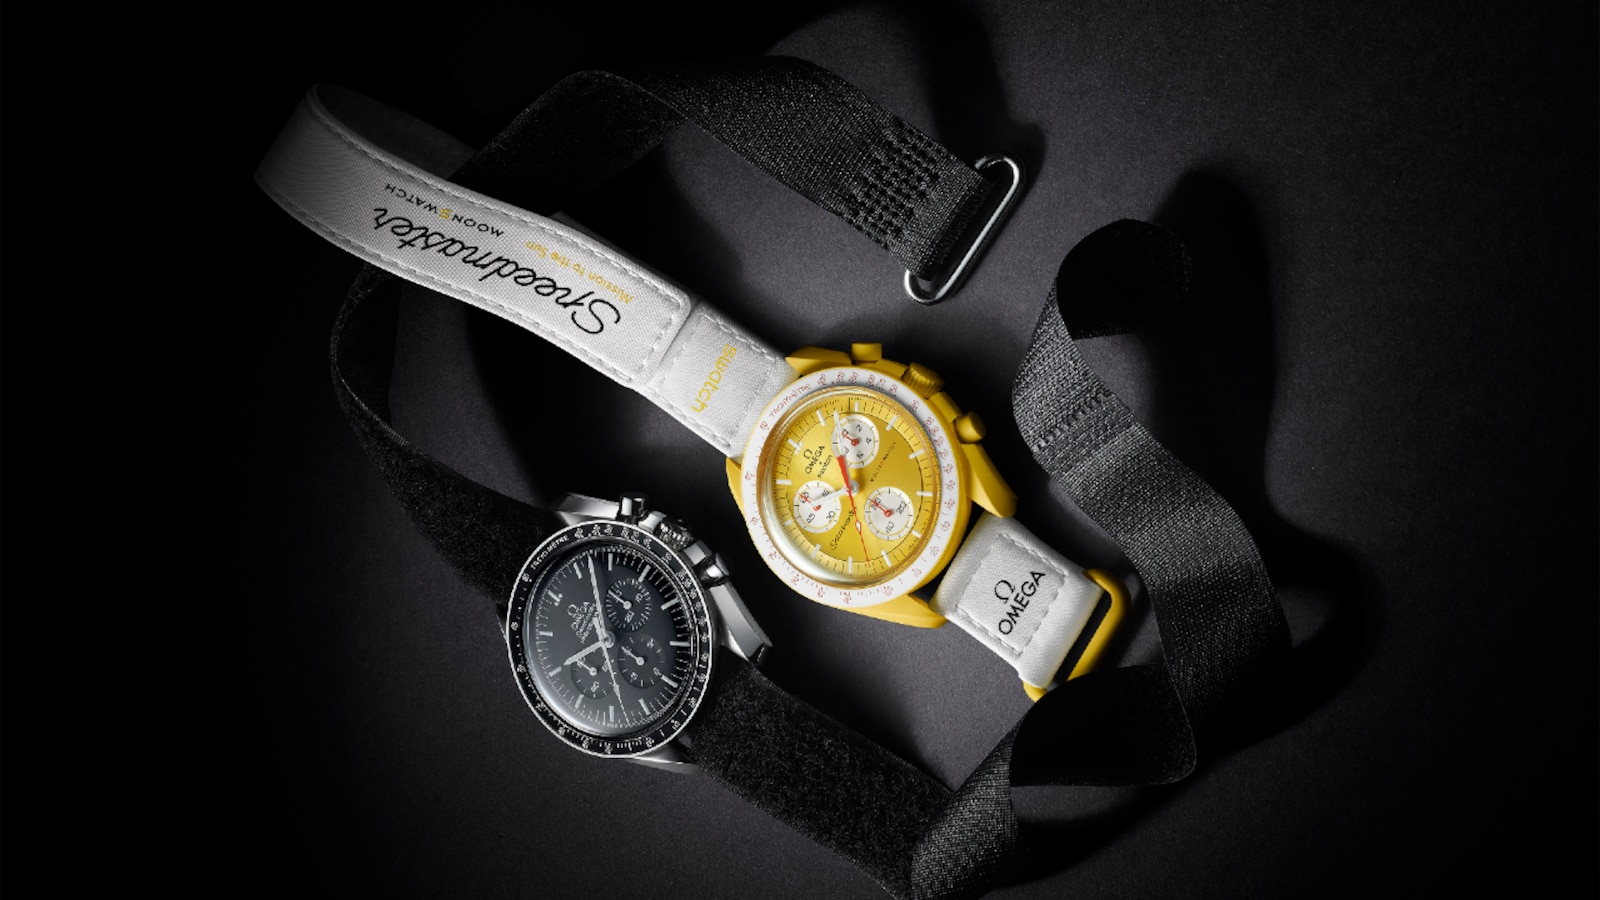 Swatch Group – Swiss made luxury watches and jewelry – Chronograph watch -  Swatch Group